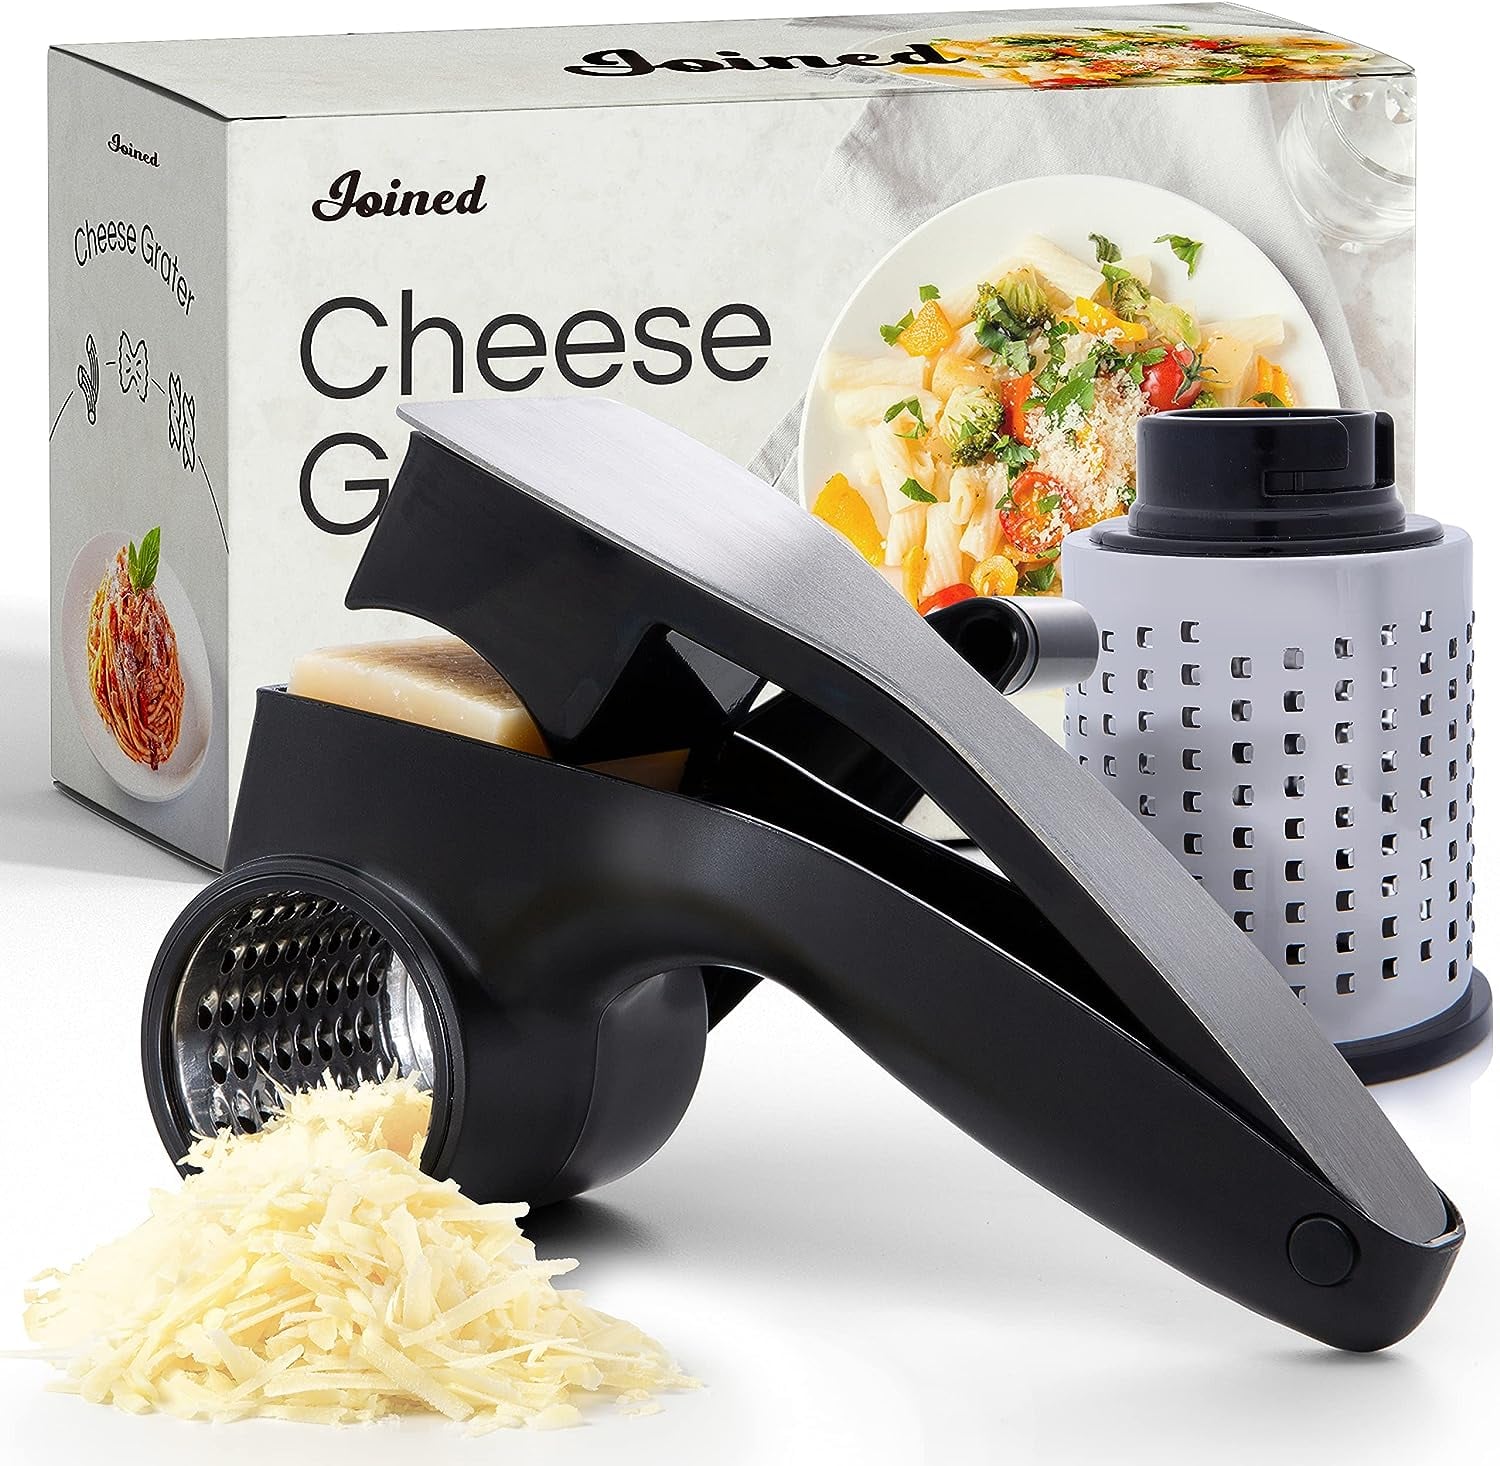 Olive Garden finally sells their cheese graters : r/mildlyinteresting